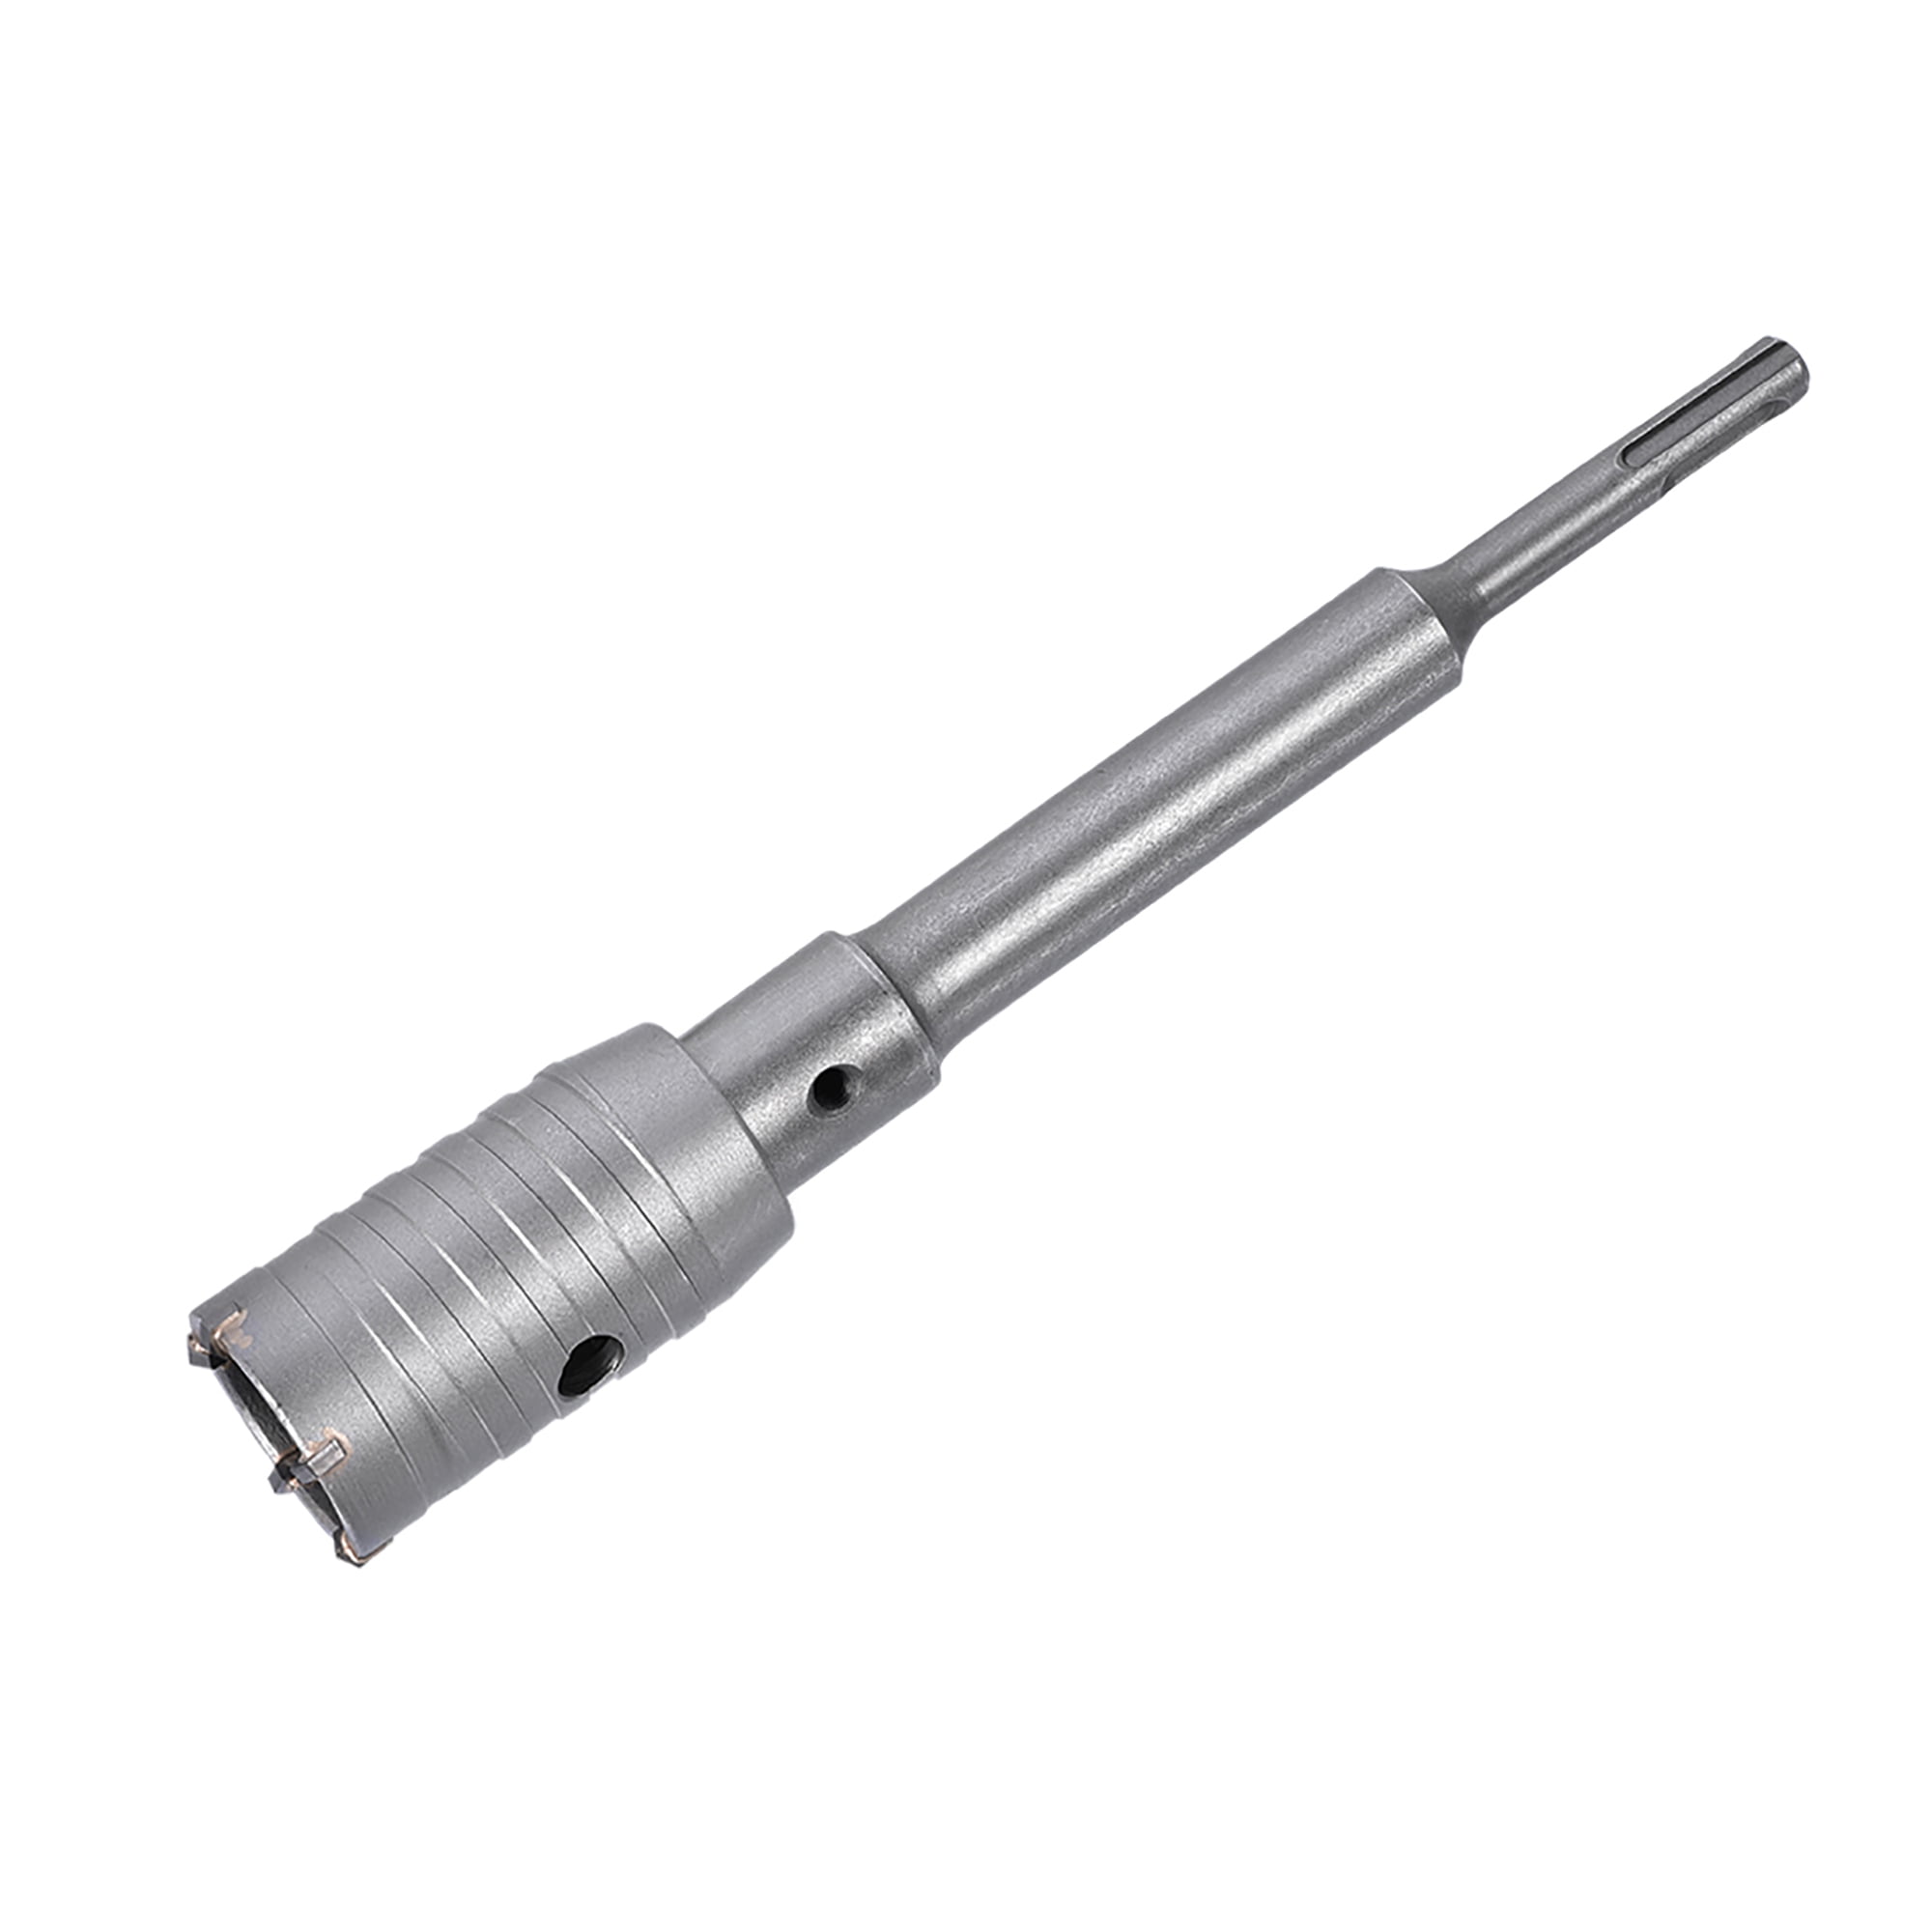 Carbide Tipped Hollow Core Wall Hole Saw Cutter Tool Drill Bit 50mm Diameter 